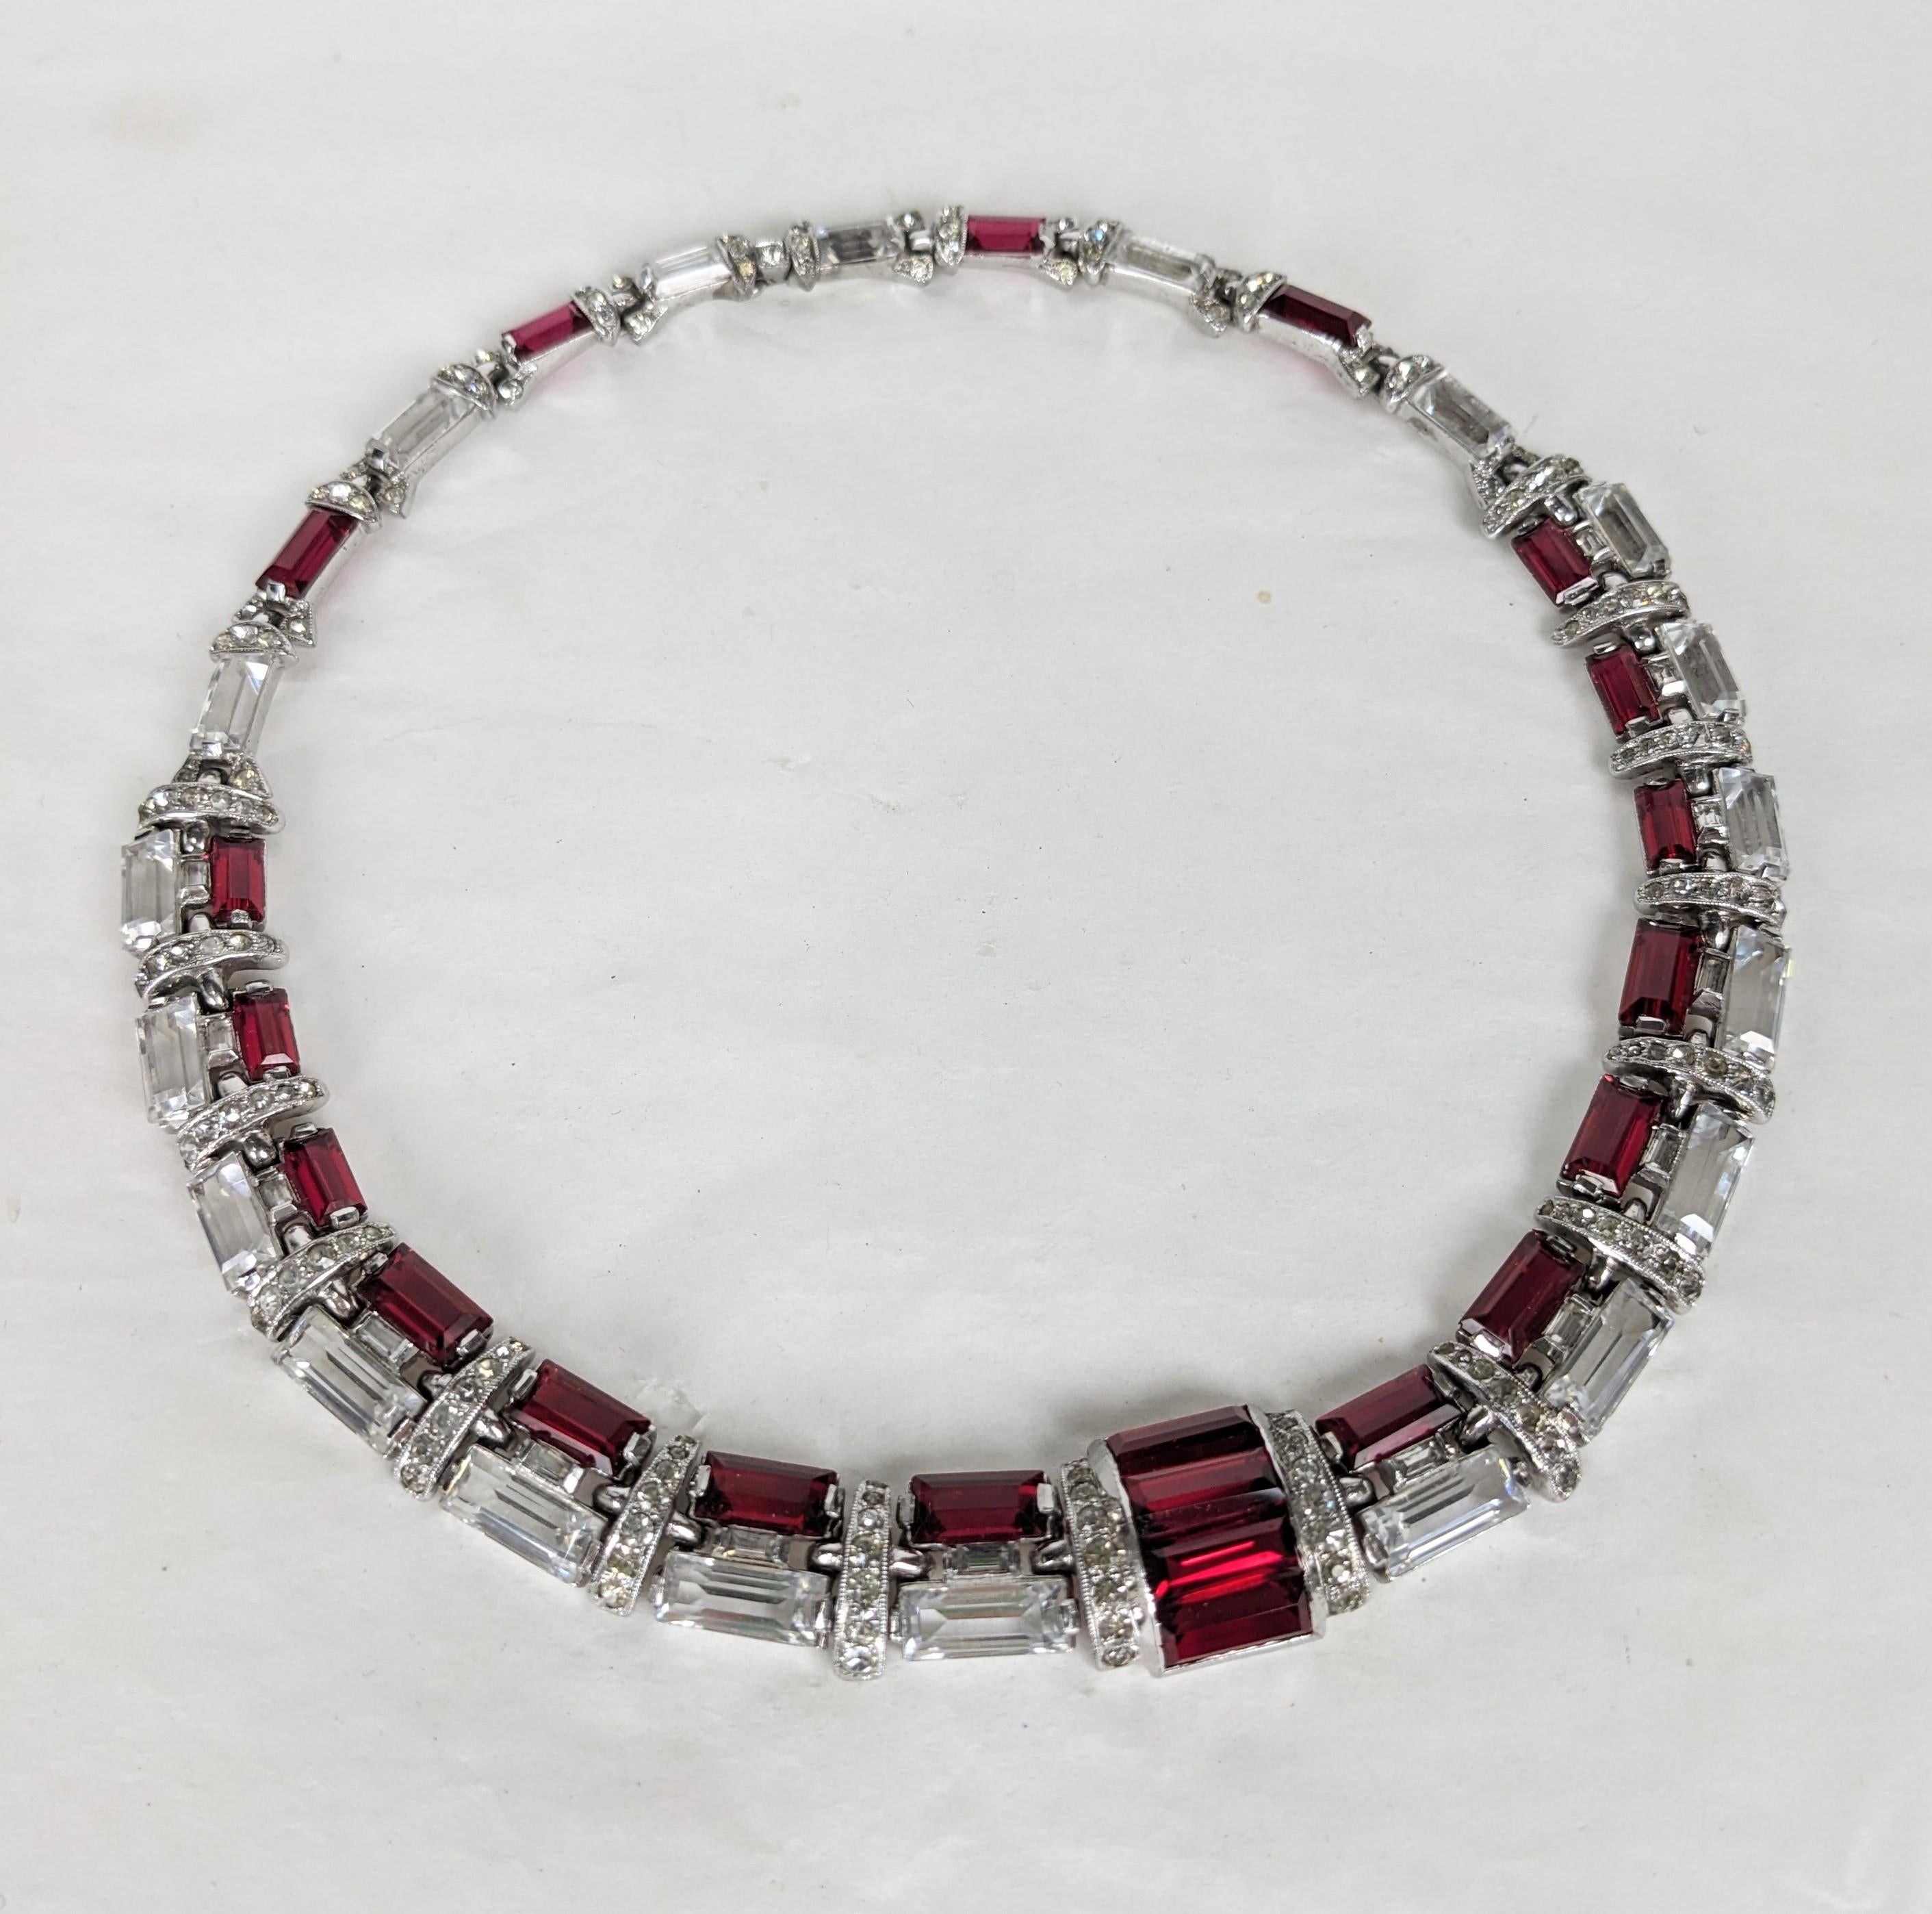 Rare and unusual Art Deco DeRosa Crystal Baguette Collar of crystal and faux ruby baguettes set into stepped design within articulated pave links. High Art Deco rhodium metal setting. Unsigned DeRosa. 
1930's USA. Length 15.5